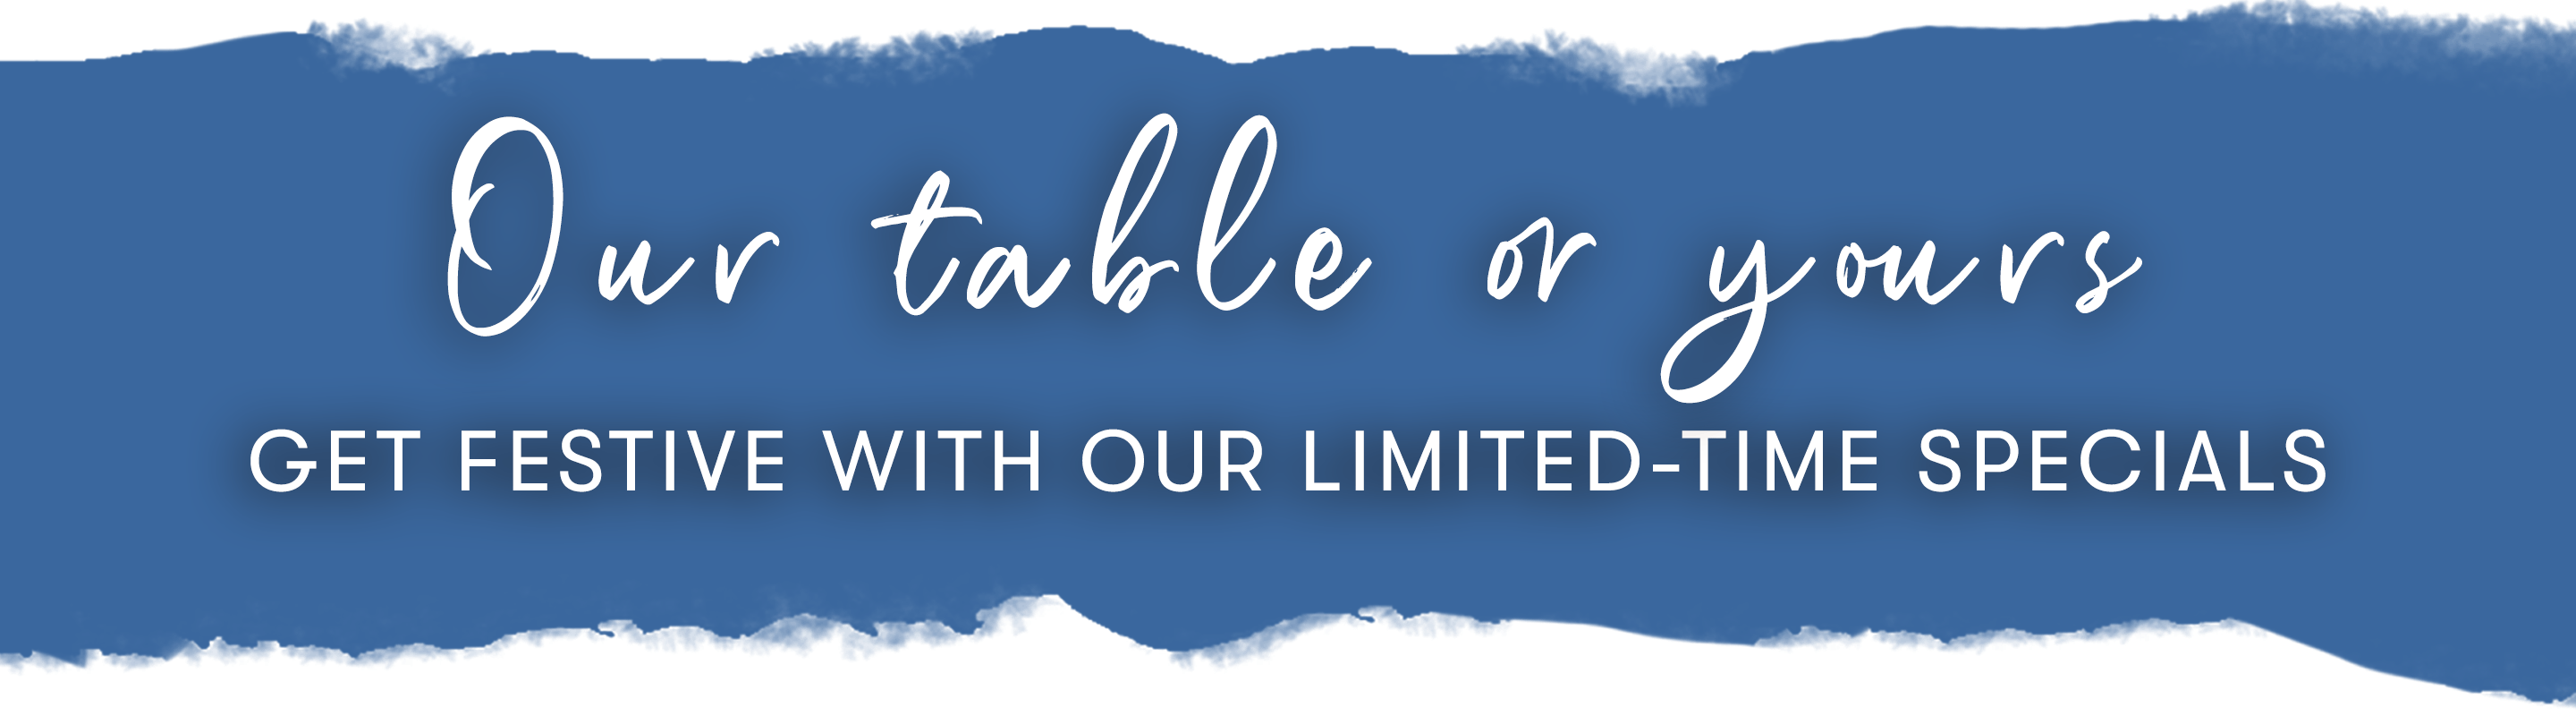 See our limited-time specials and decide - our table or yours